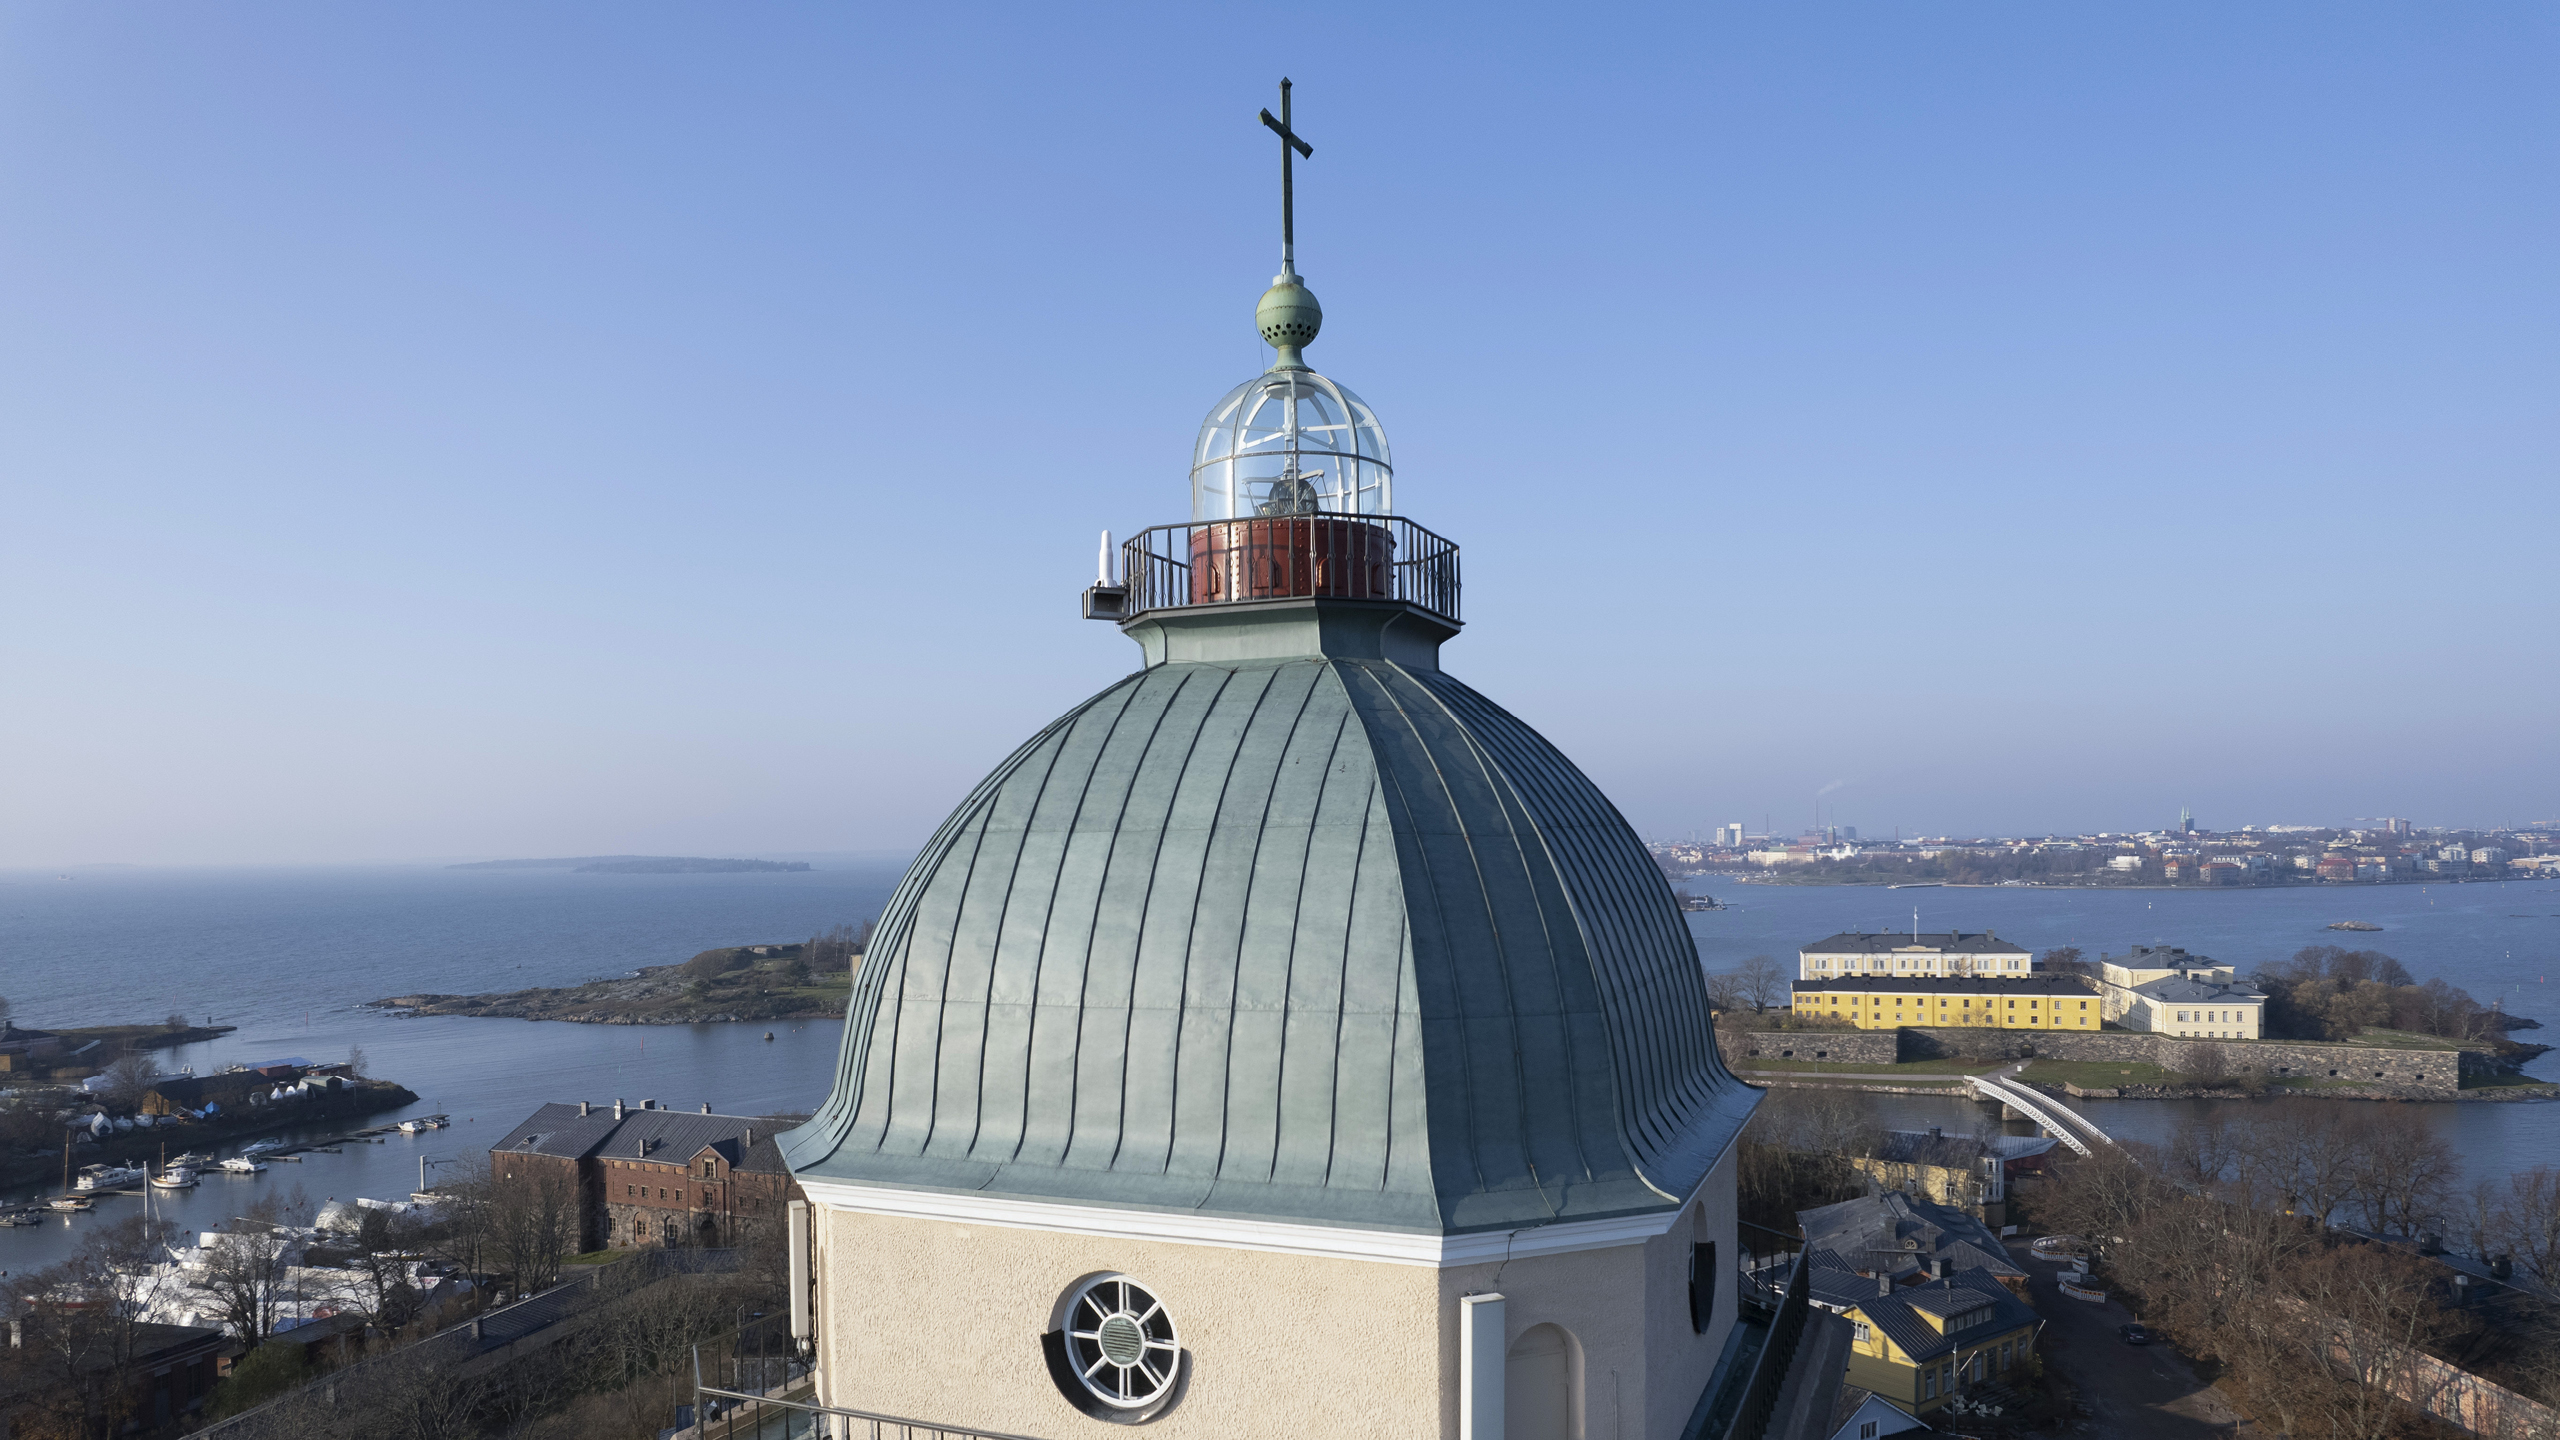 The renovation of the of Suomenlinna Church copper roof was completed using recycled copper from the original roof.